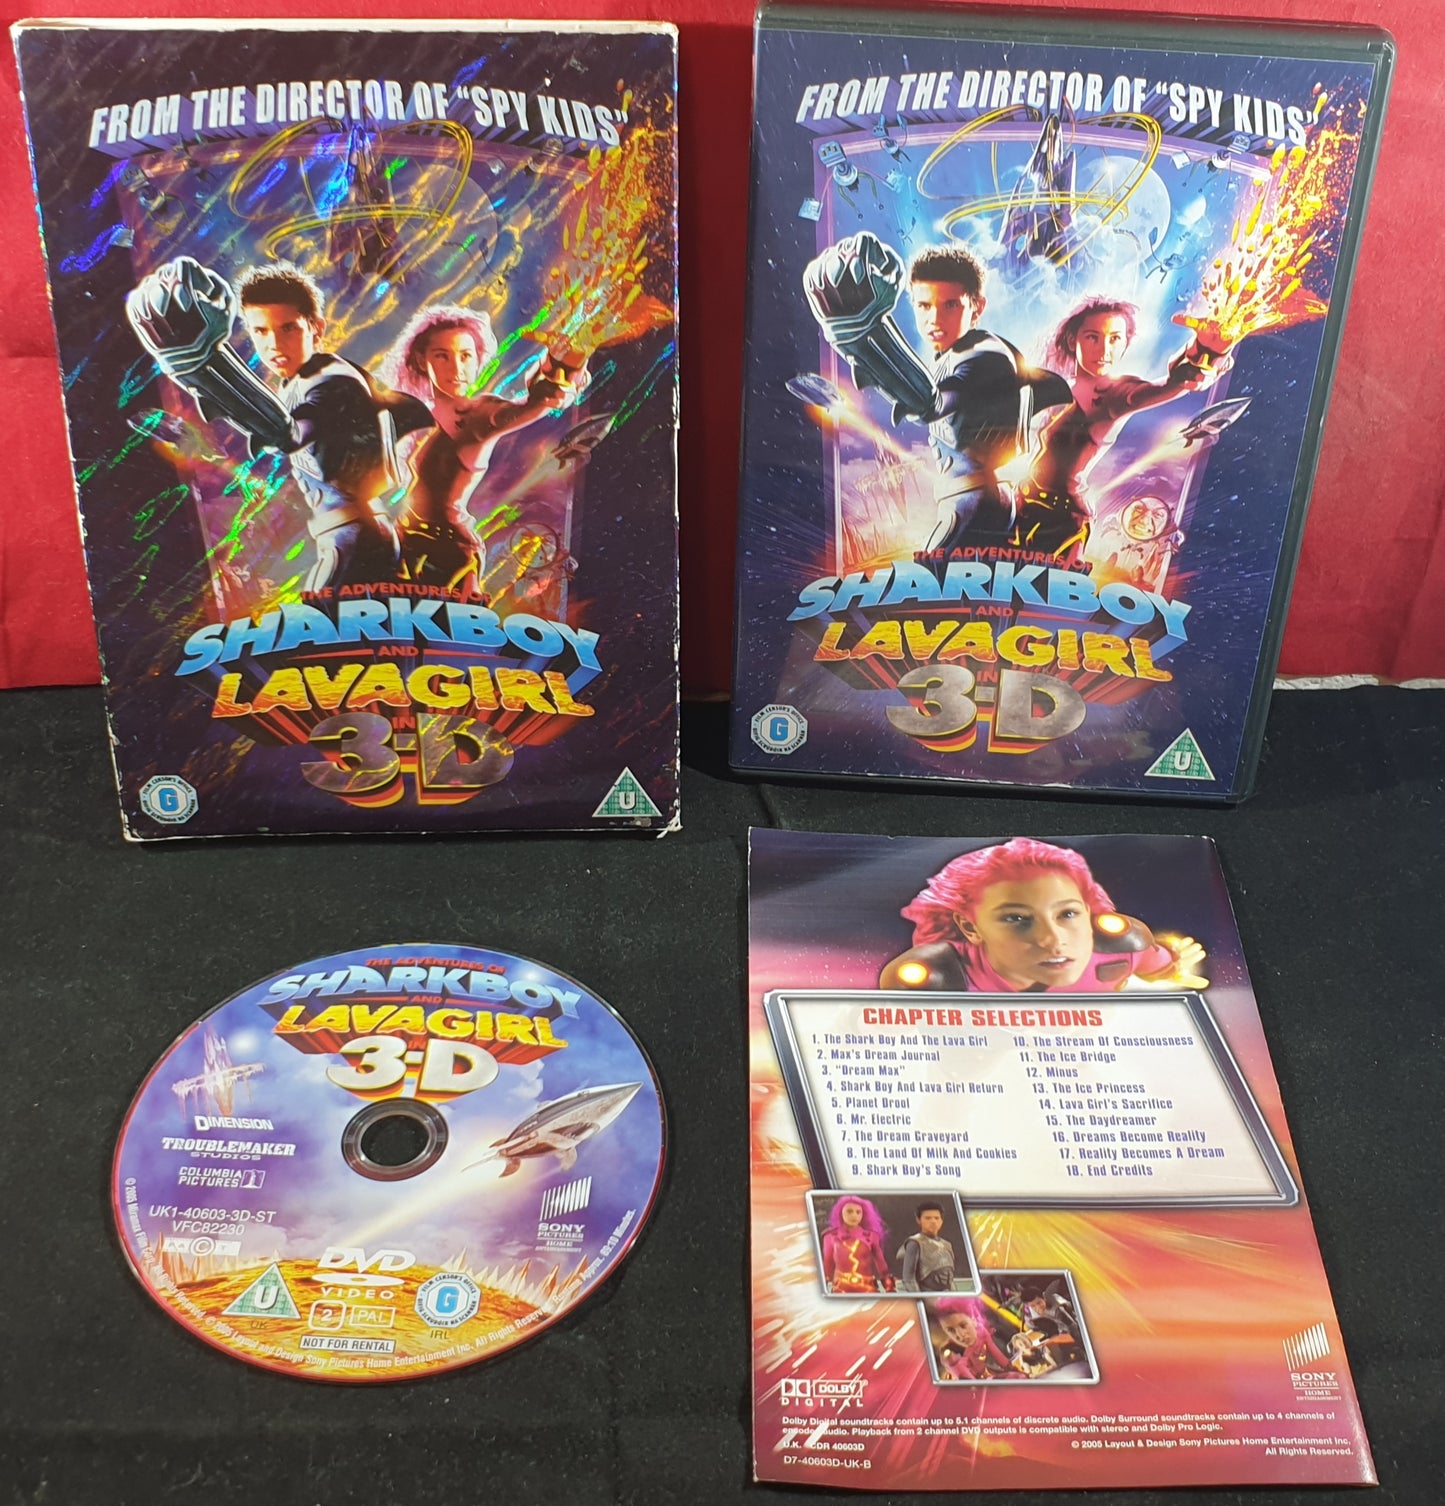 The Adventures of Sharkboy and Lavagirl in 3-D DVD